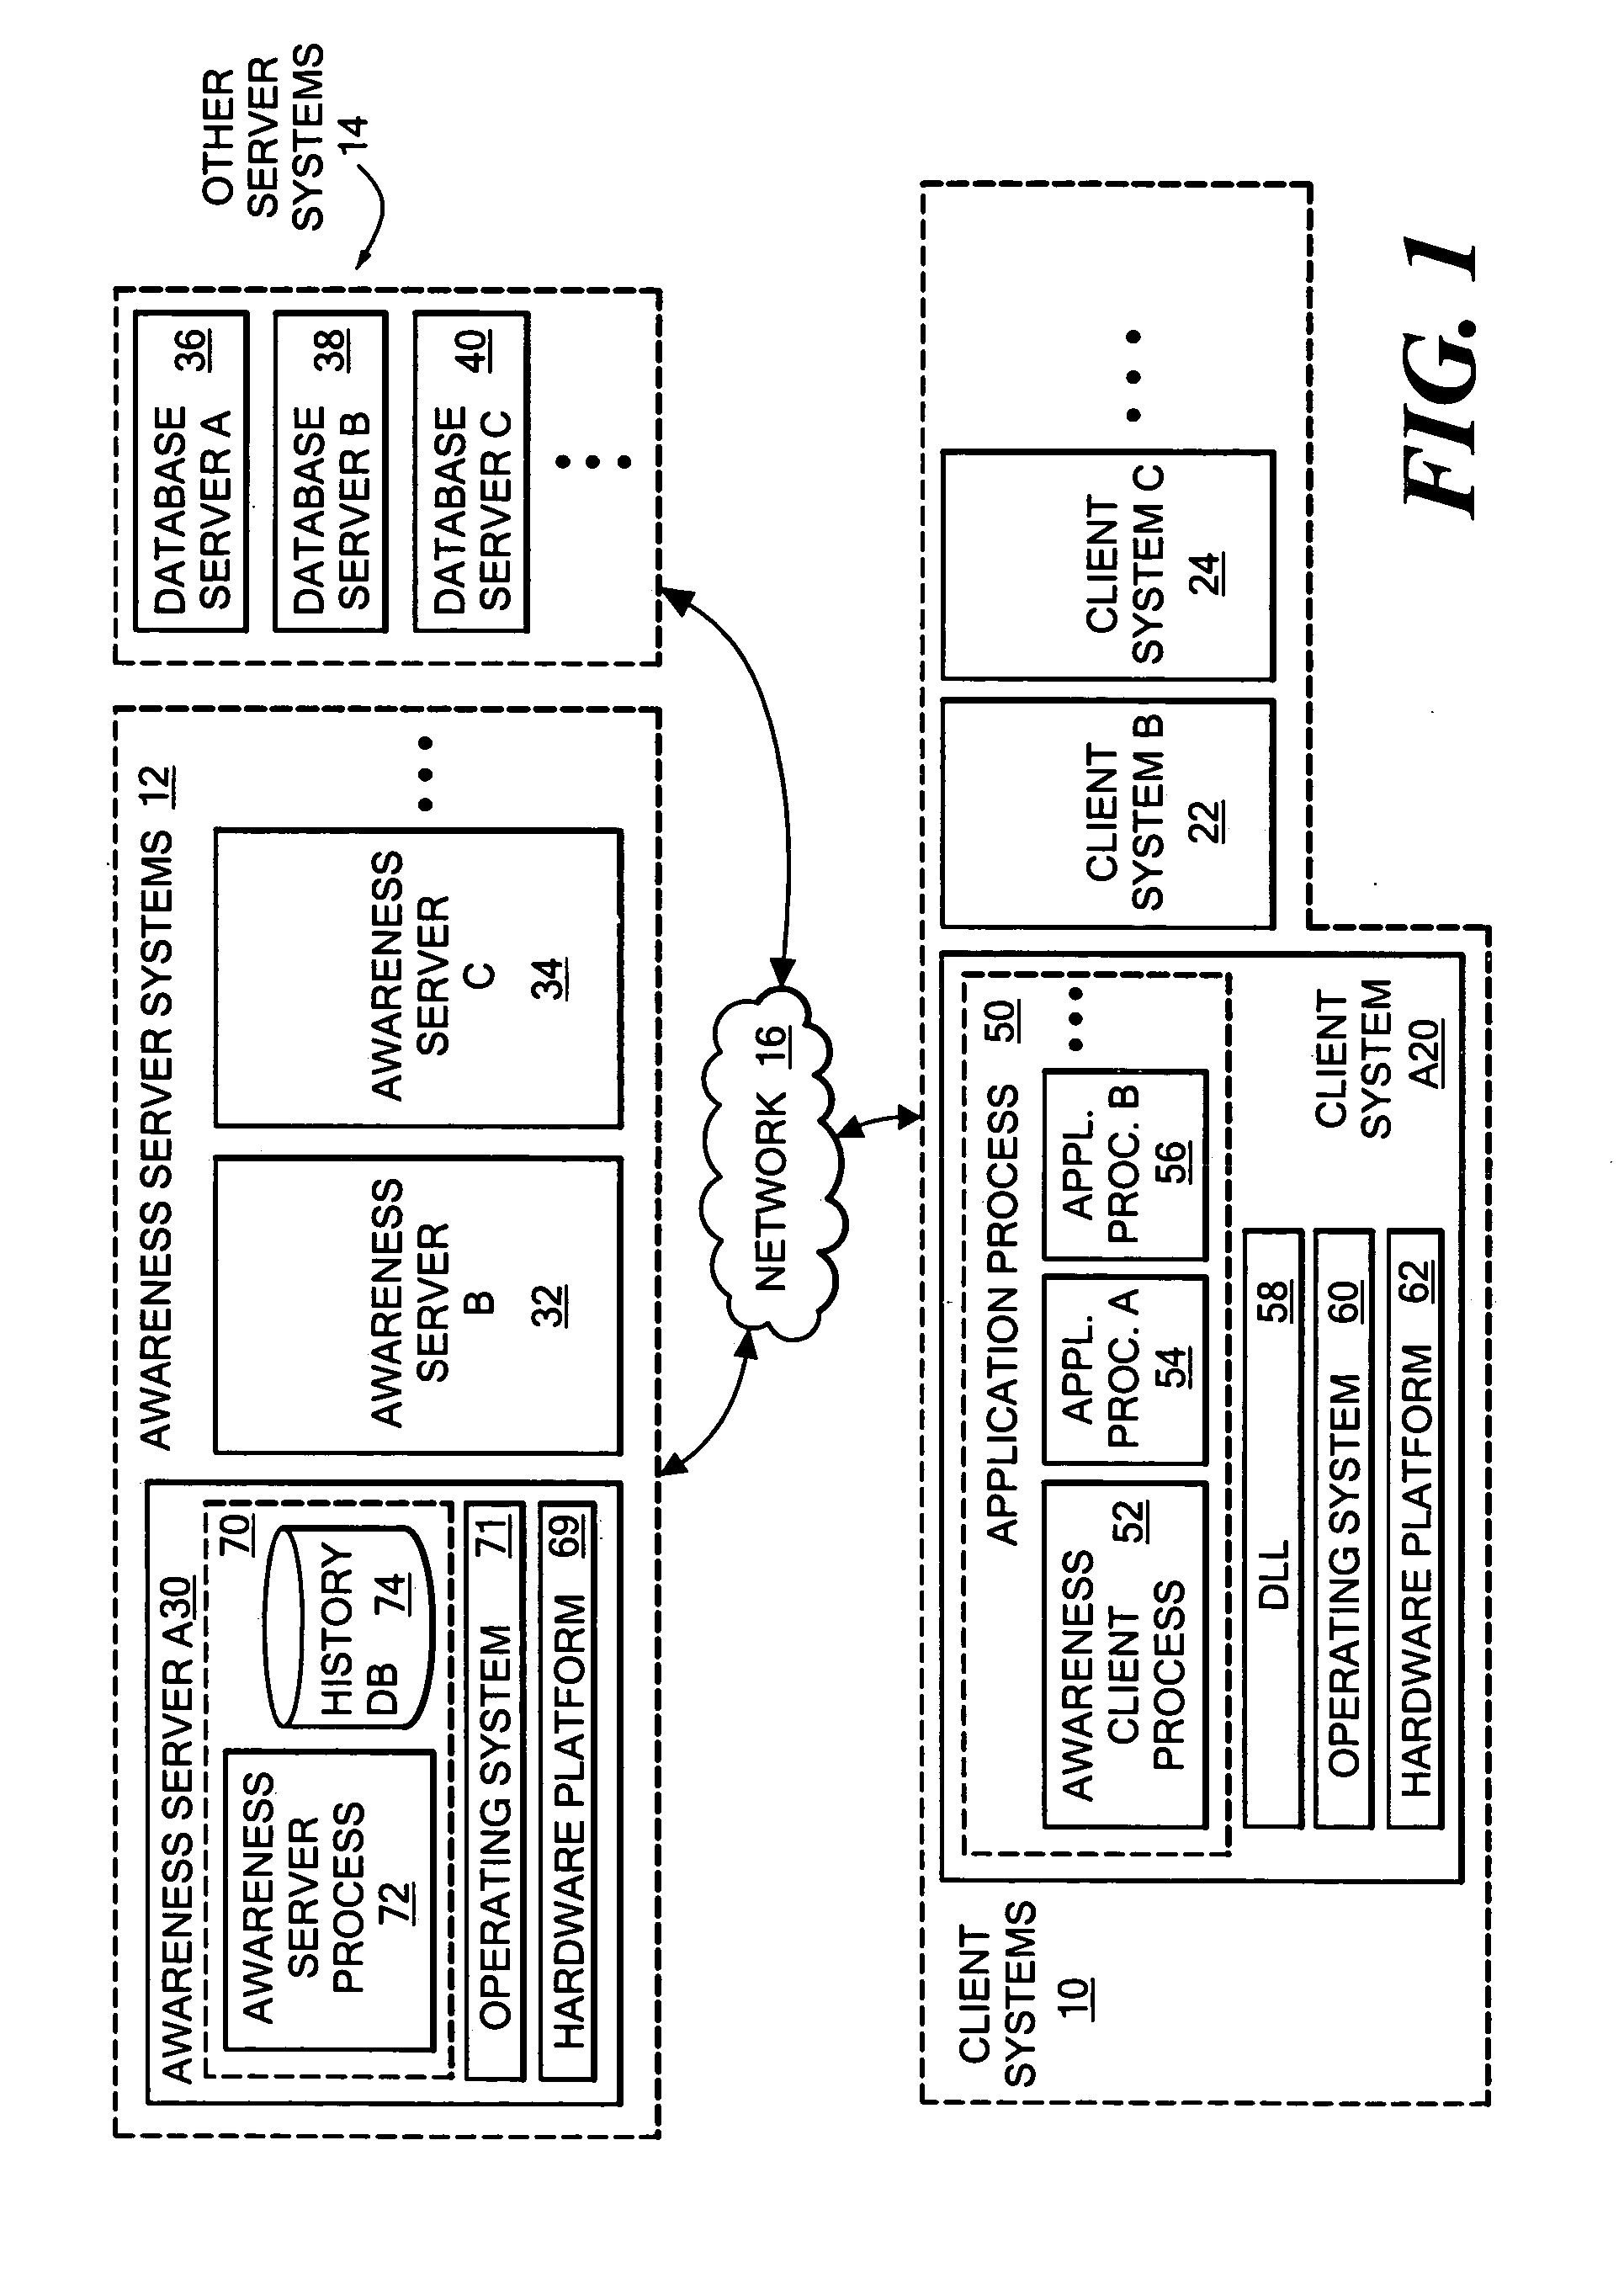 Method and system for sensing and communicating updated status information for remote users accessible through an instant messaging system